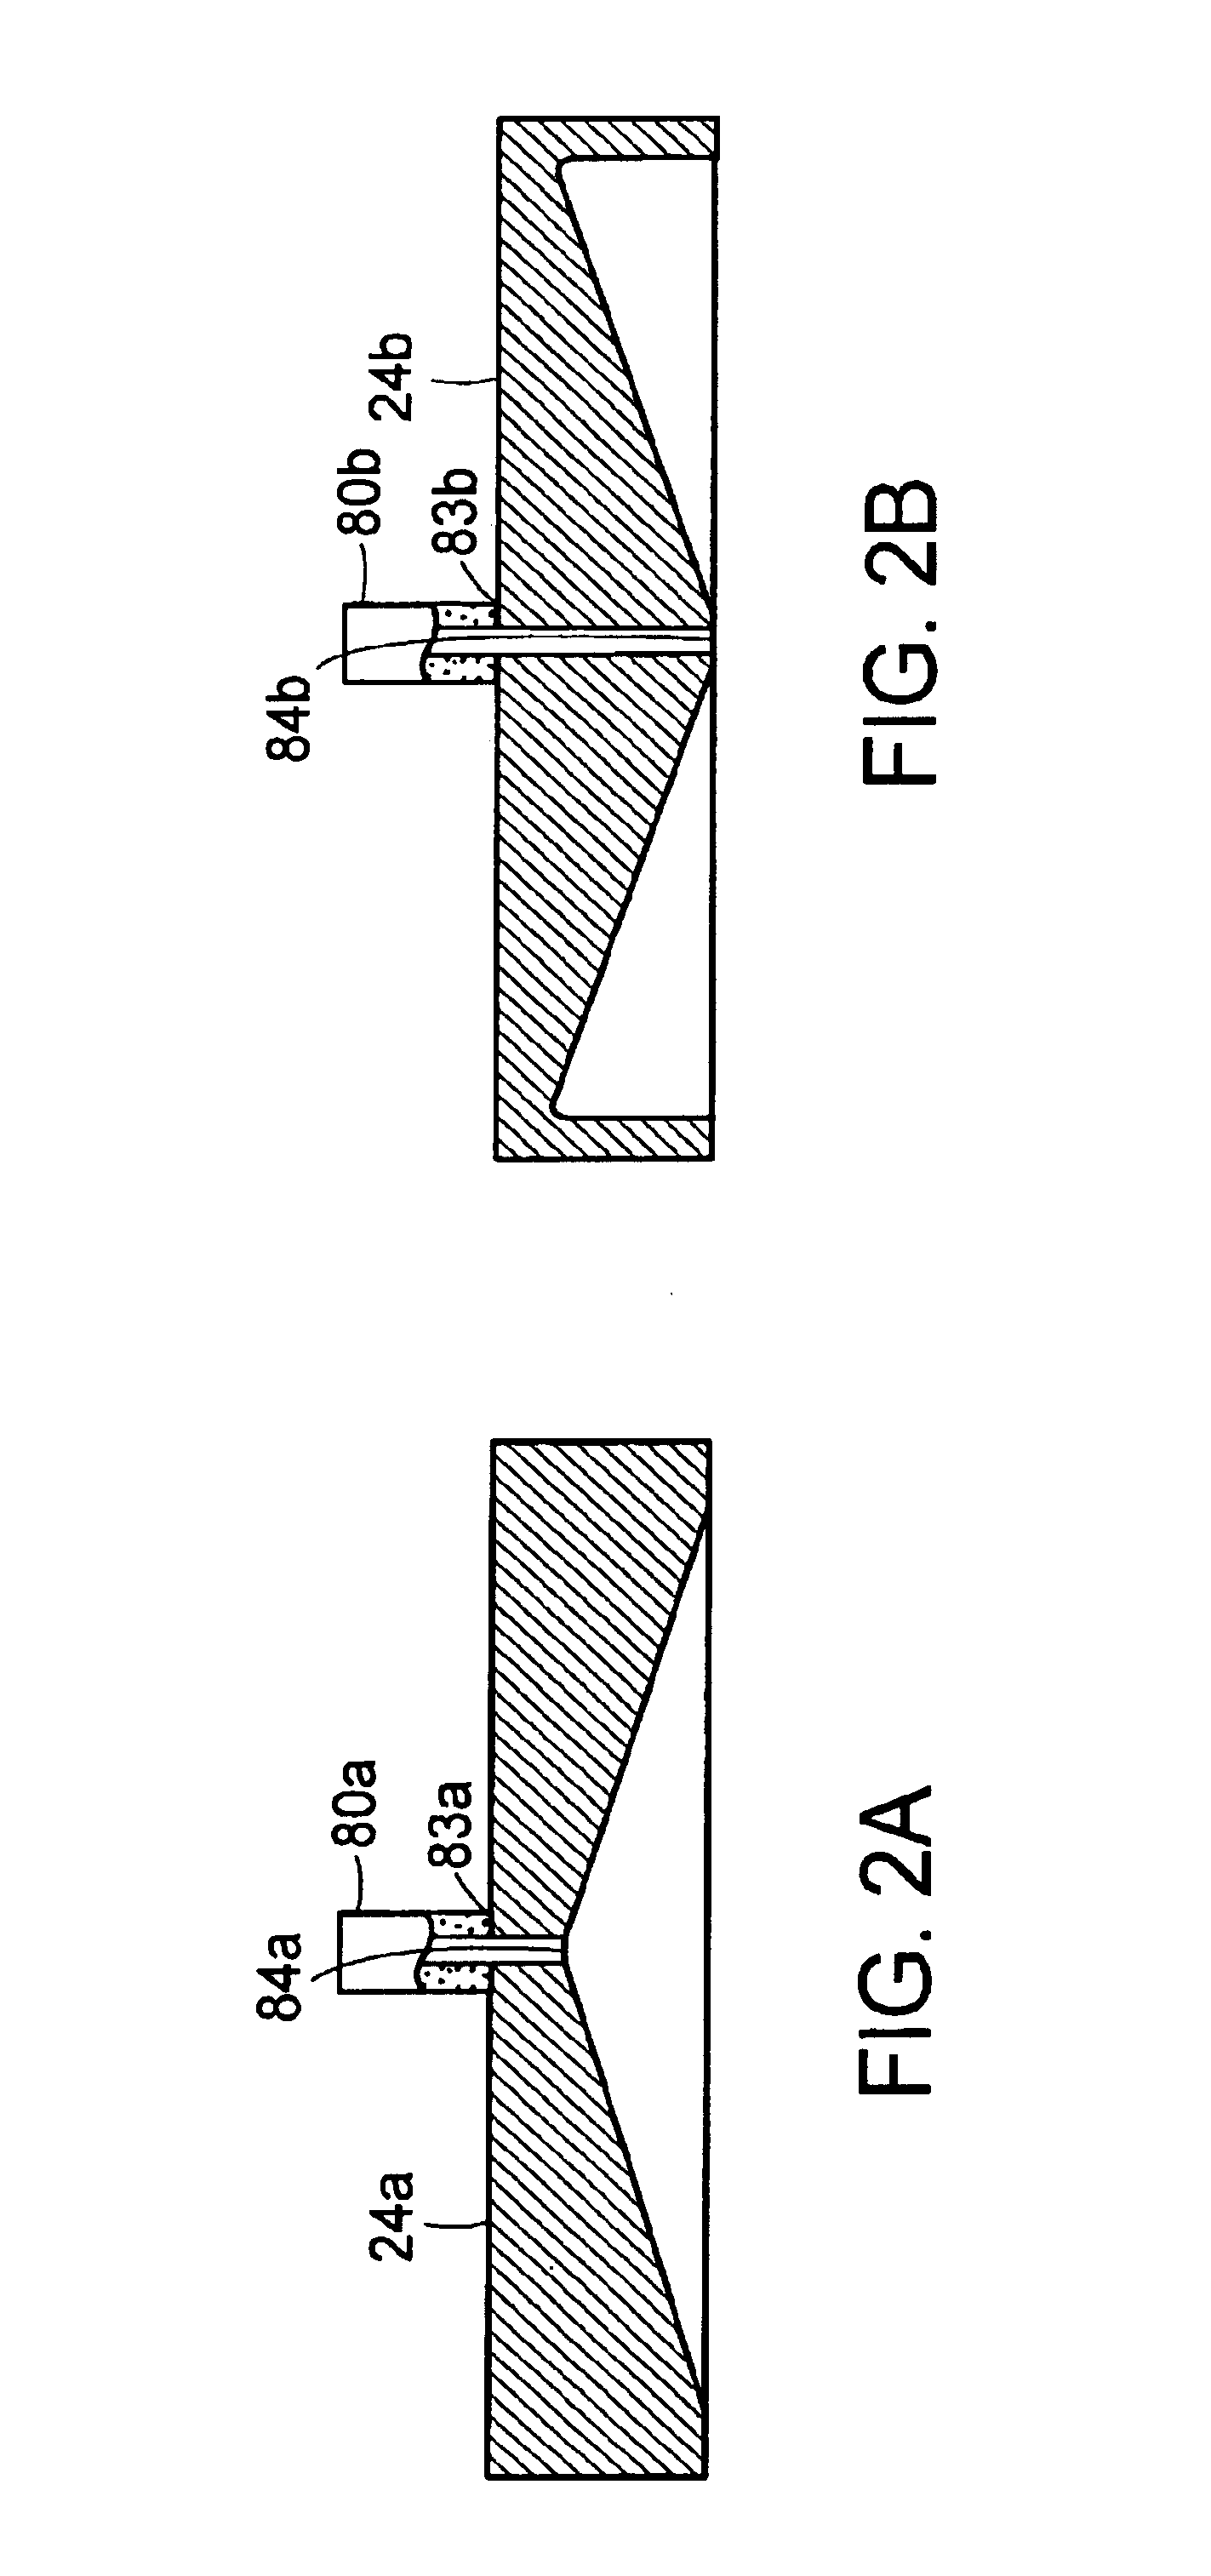 Apparatus and method for electroless deposition of materials on semiconductor substrates